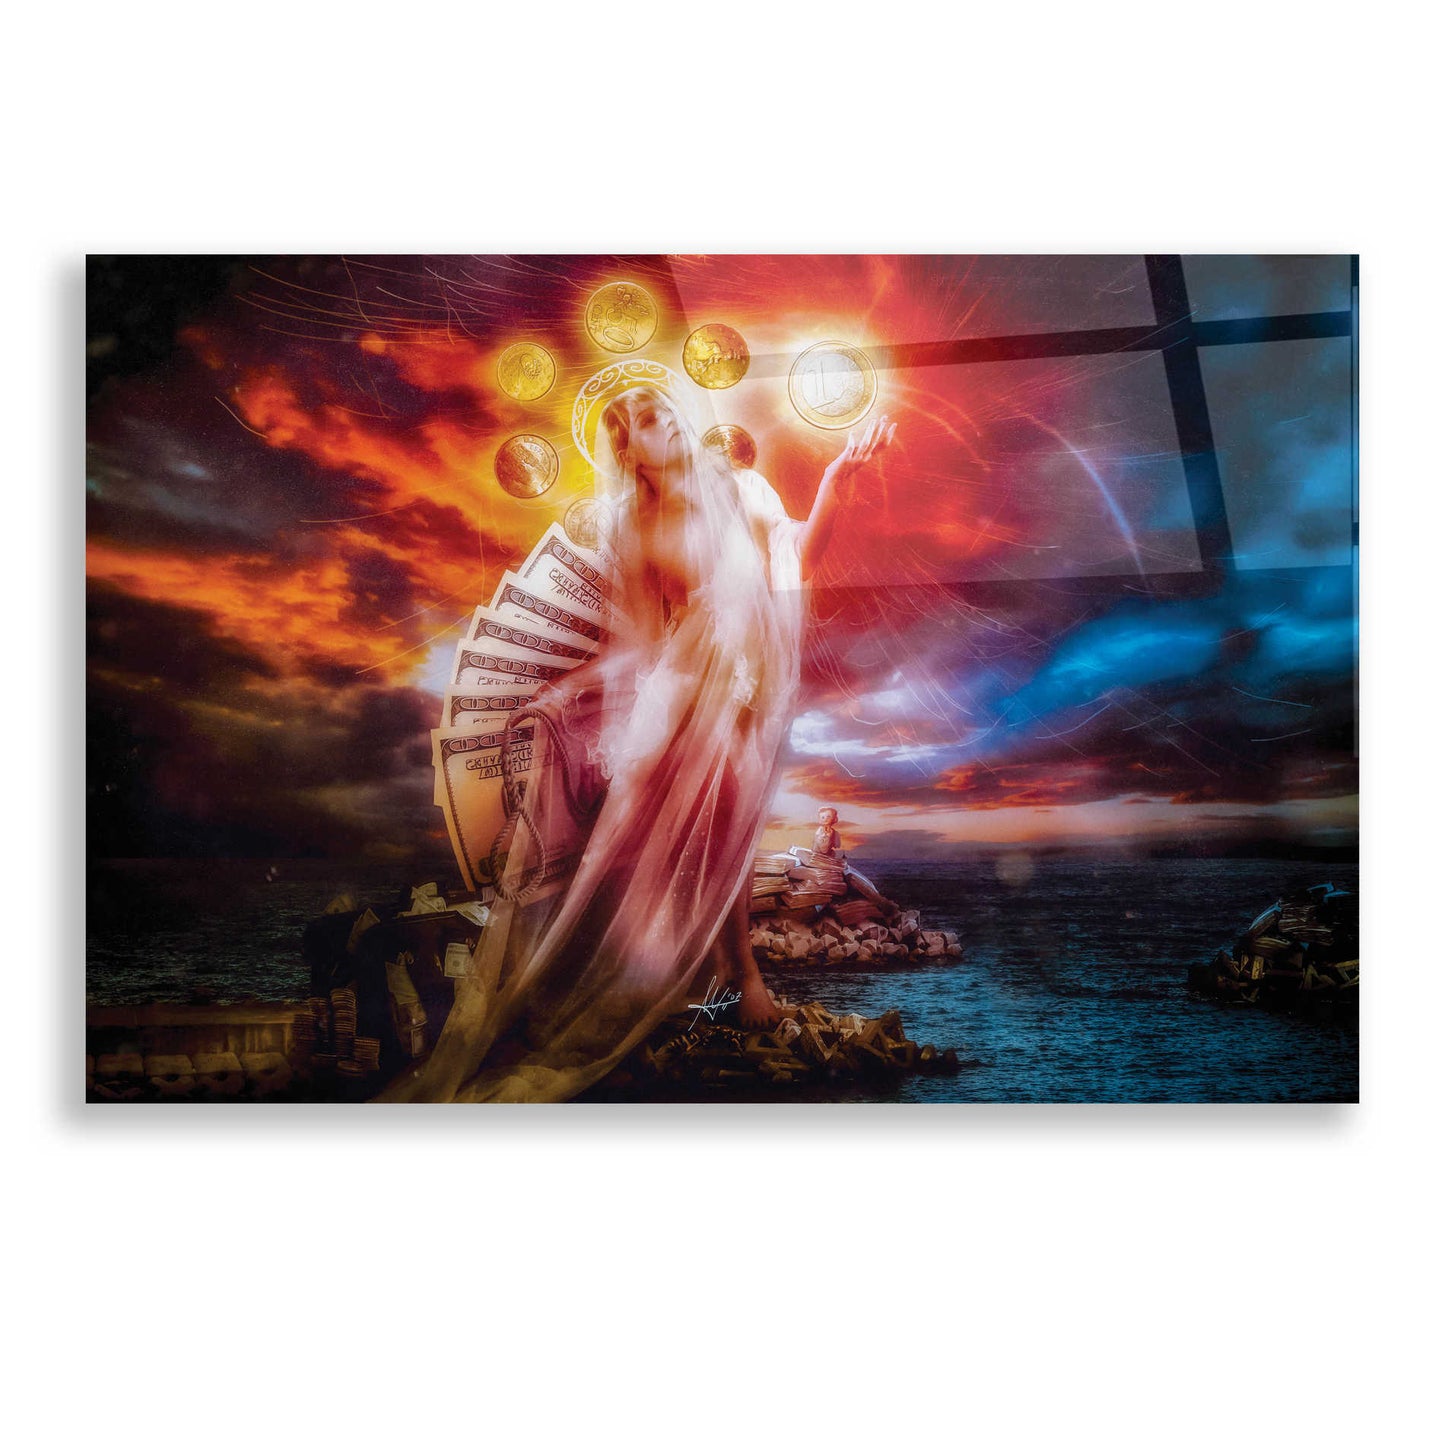 Epic Art 'St. Mary of Coins' by Mario Sanchez Nevado, Acrylic Glass Wall Art,16x24